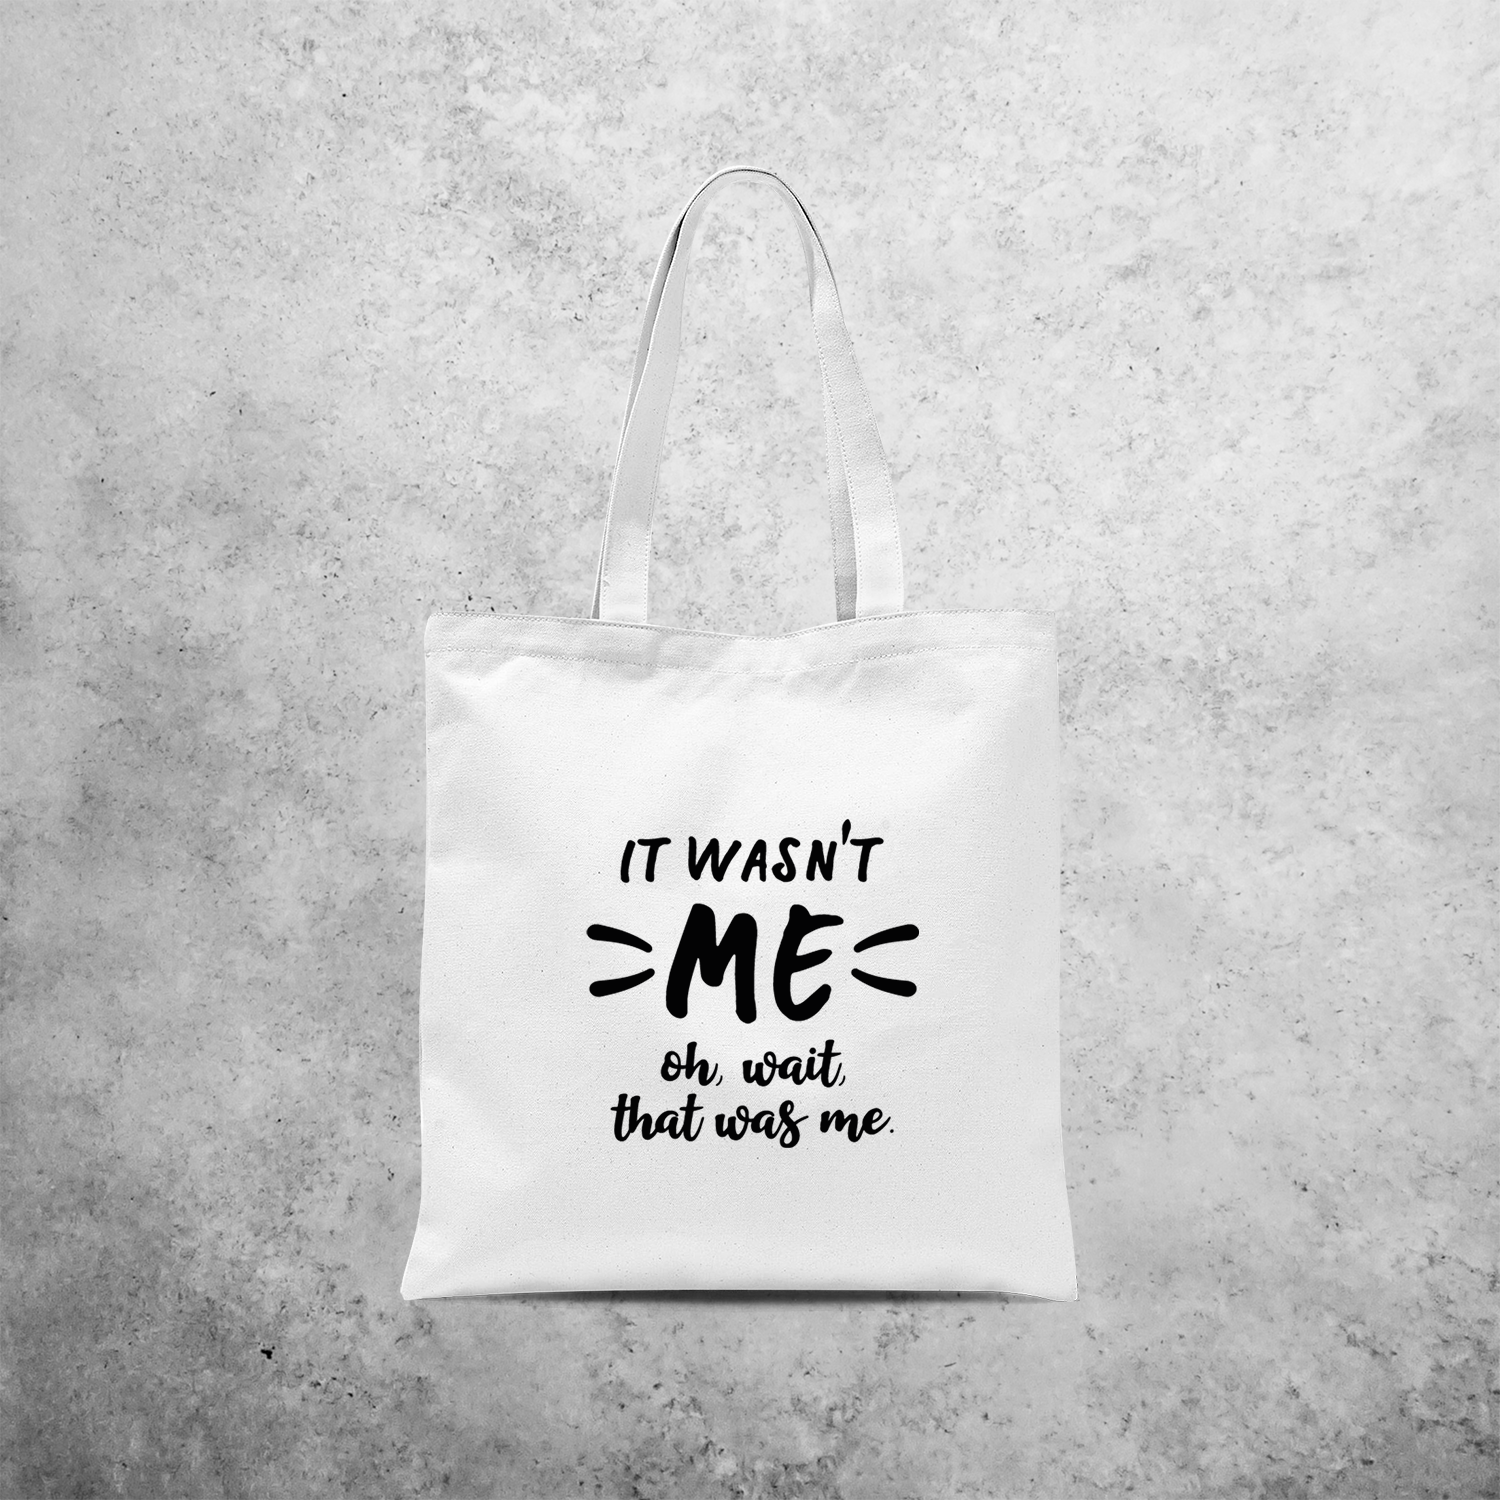 'It wasn't me - Oh, wait, that was me.' tote bag